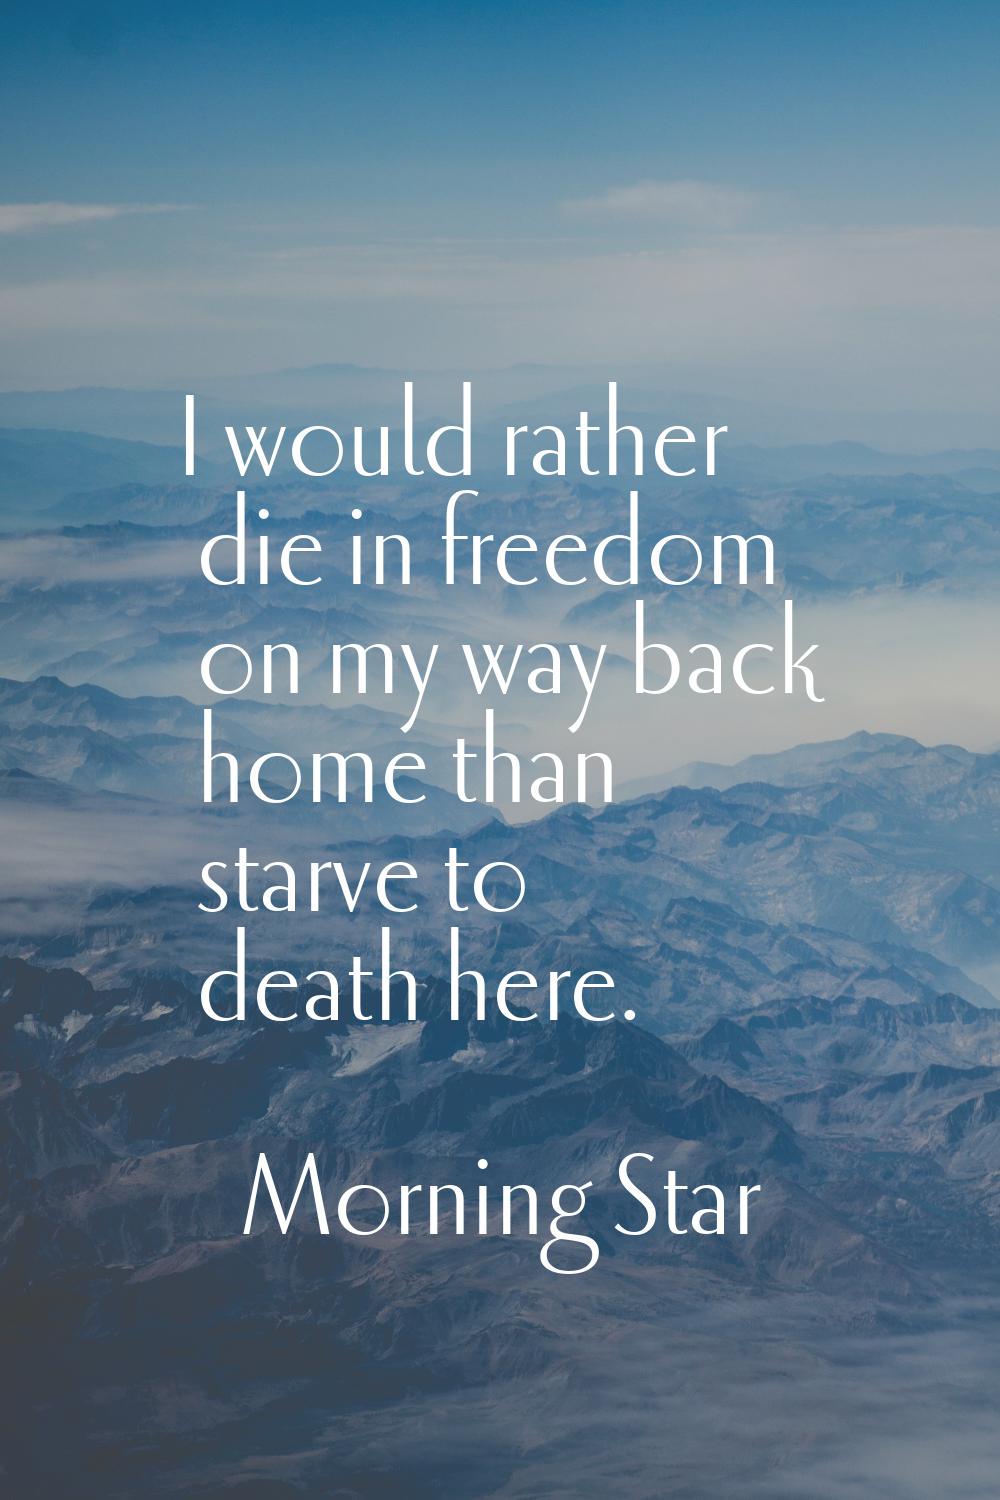 I would rather die in freedom on my way back home than starve to death here.